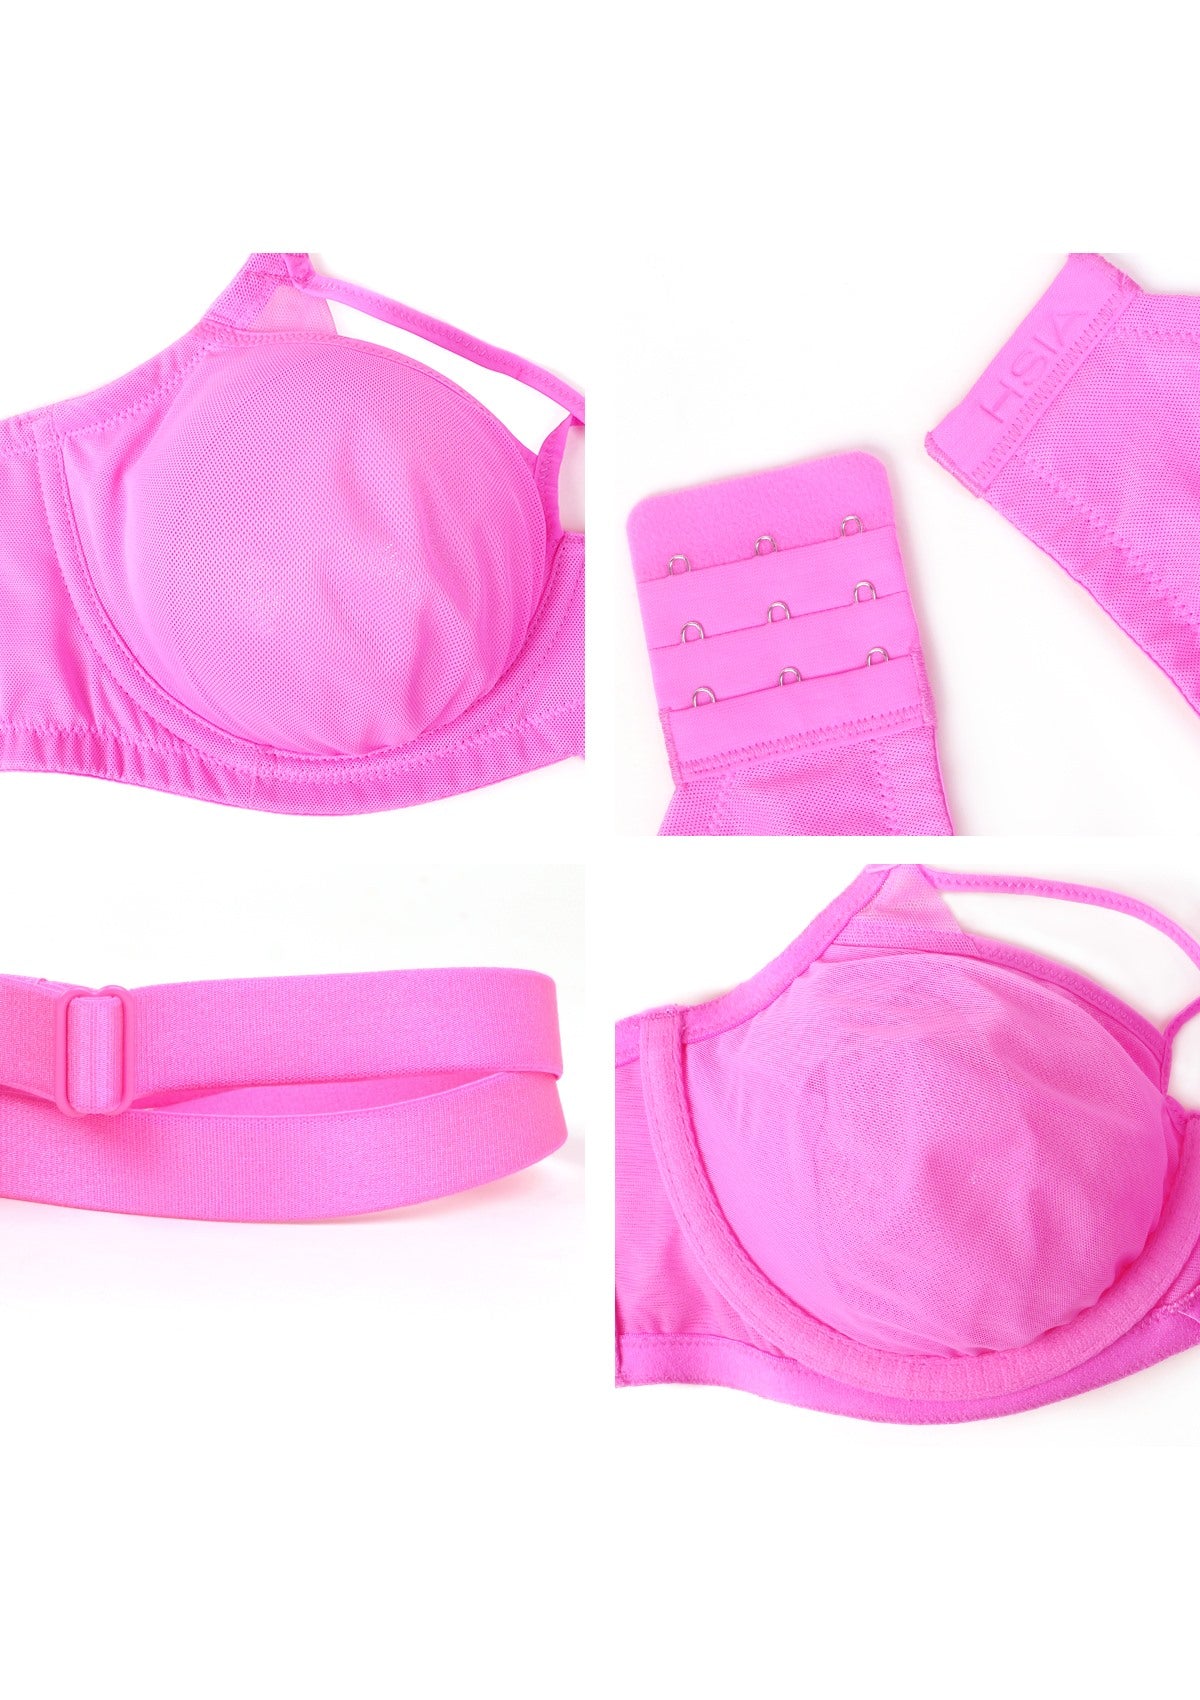 HSIA Billie Cross Front Strap Smooth Sheer Mesh Comfy Underwire Bra - Barbie Pink / 40 / DD/E